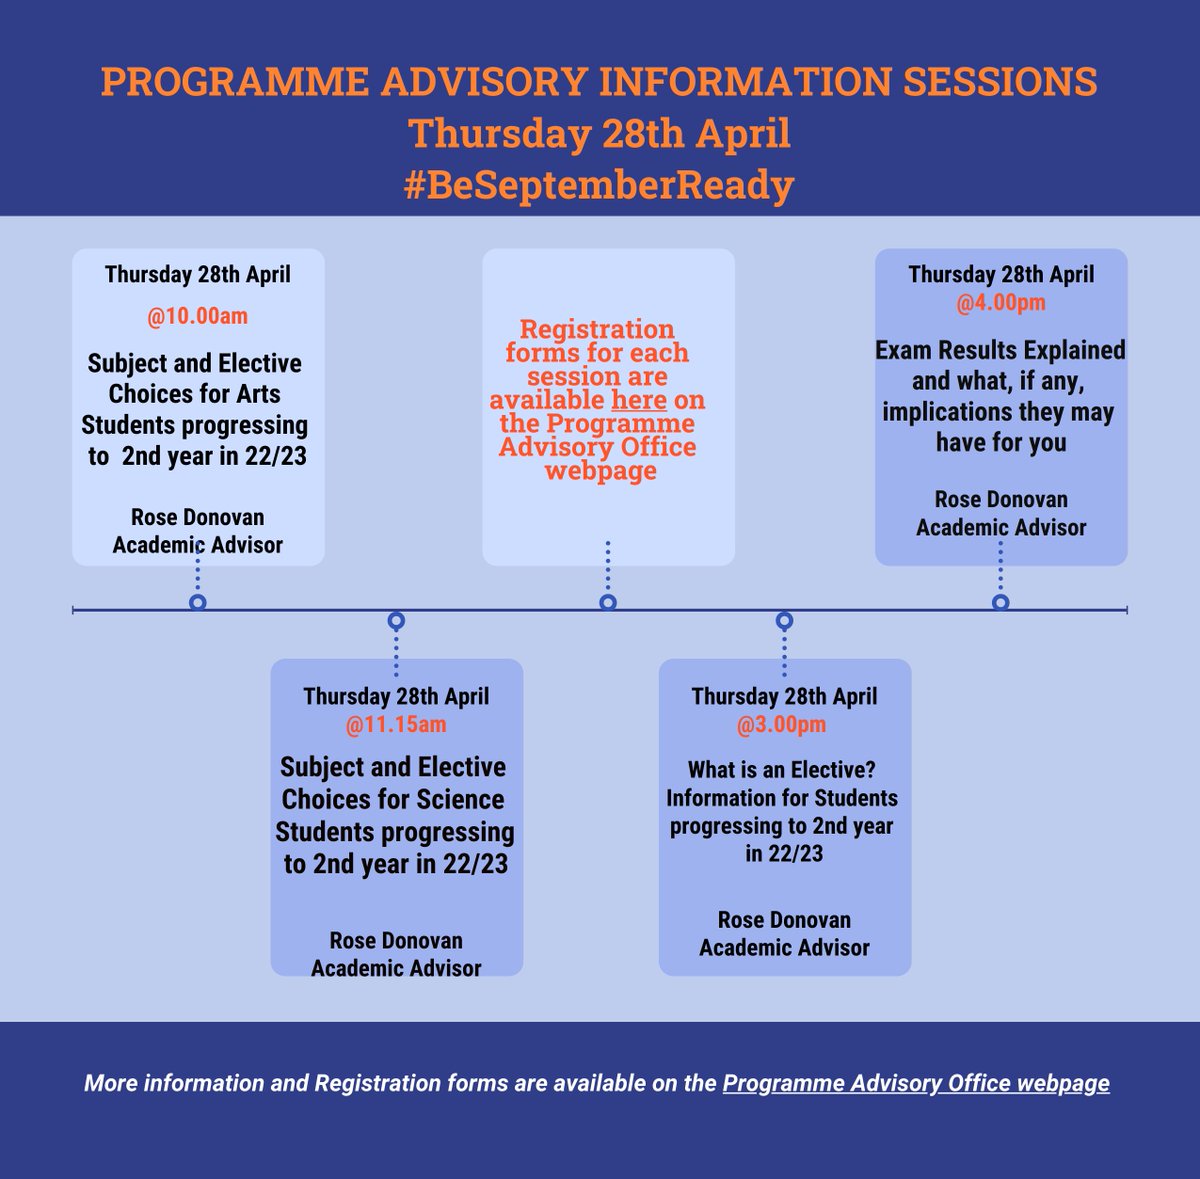 First Year Students - The Programme Advisory Office are hosting information sessions next week on Wednesday 27th and Thursday 28th April. Register via this link: maynoothuniversity.ie/programme-advi… #BeSeptemberReady